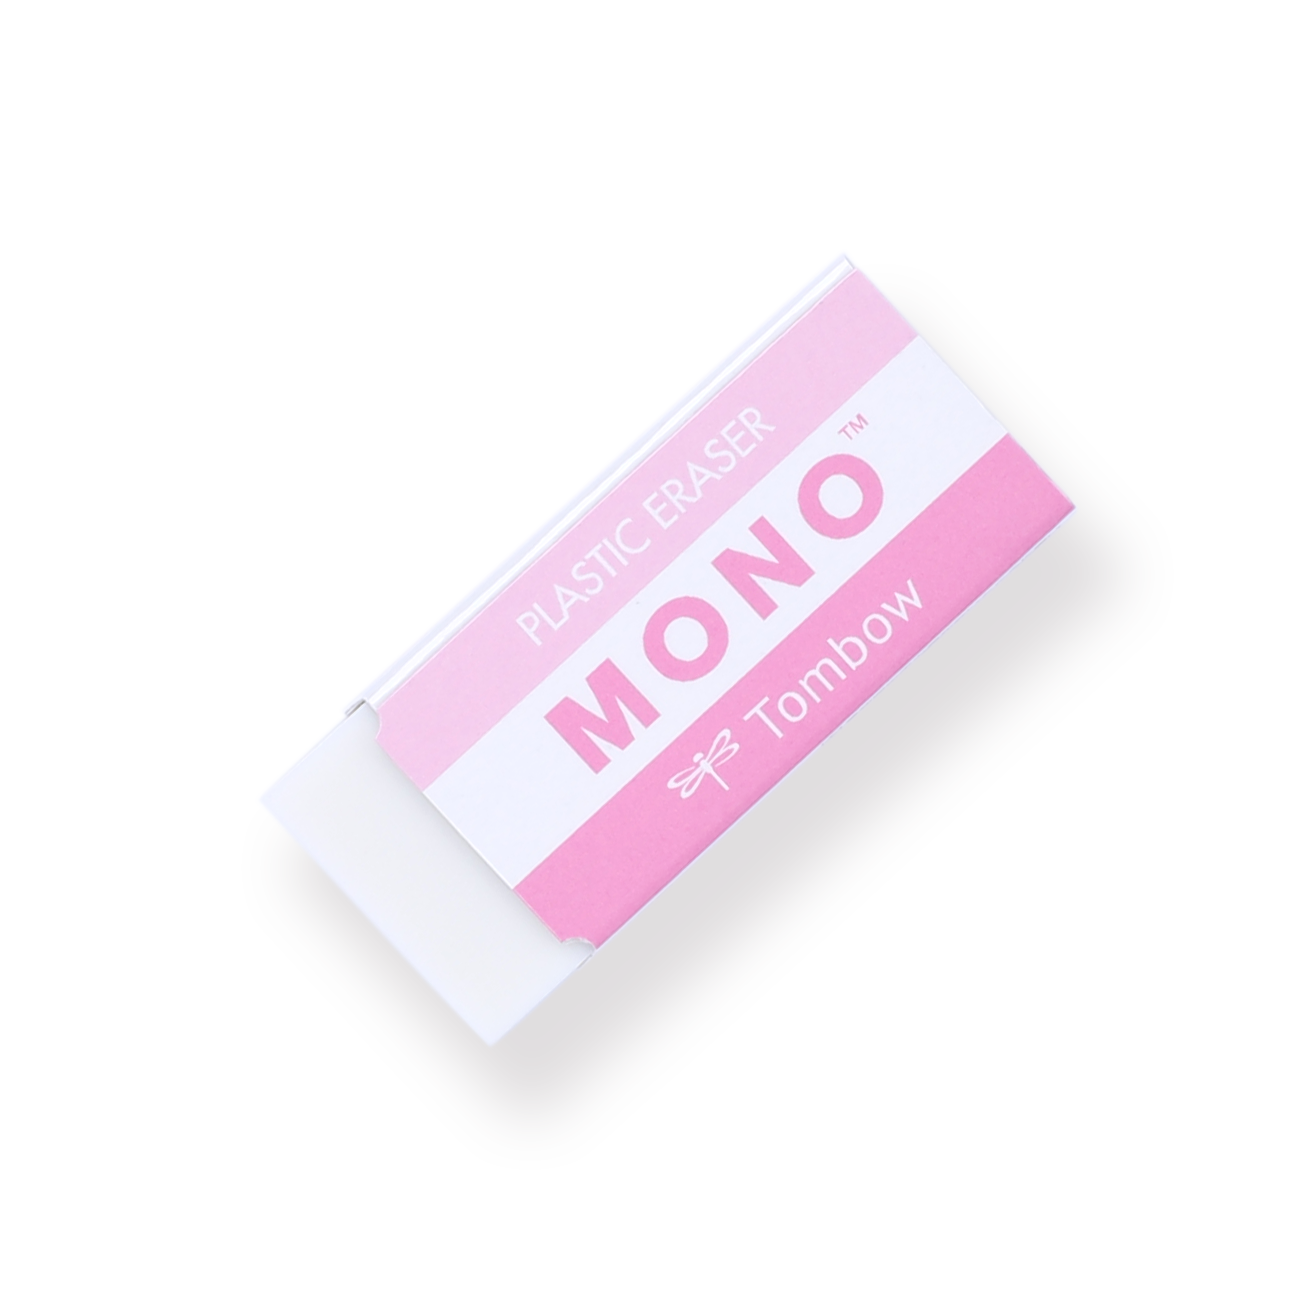 Tombow MONO x Sanrio Limited Edition Eraser - My Melody